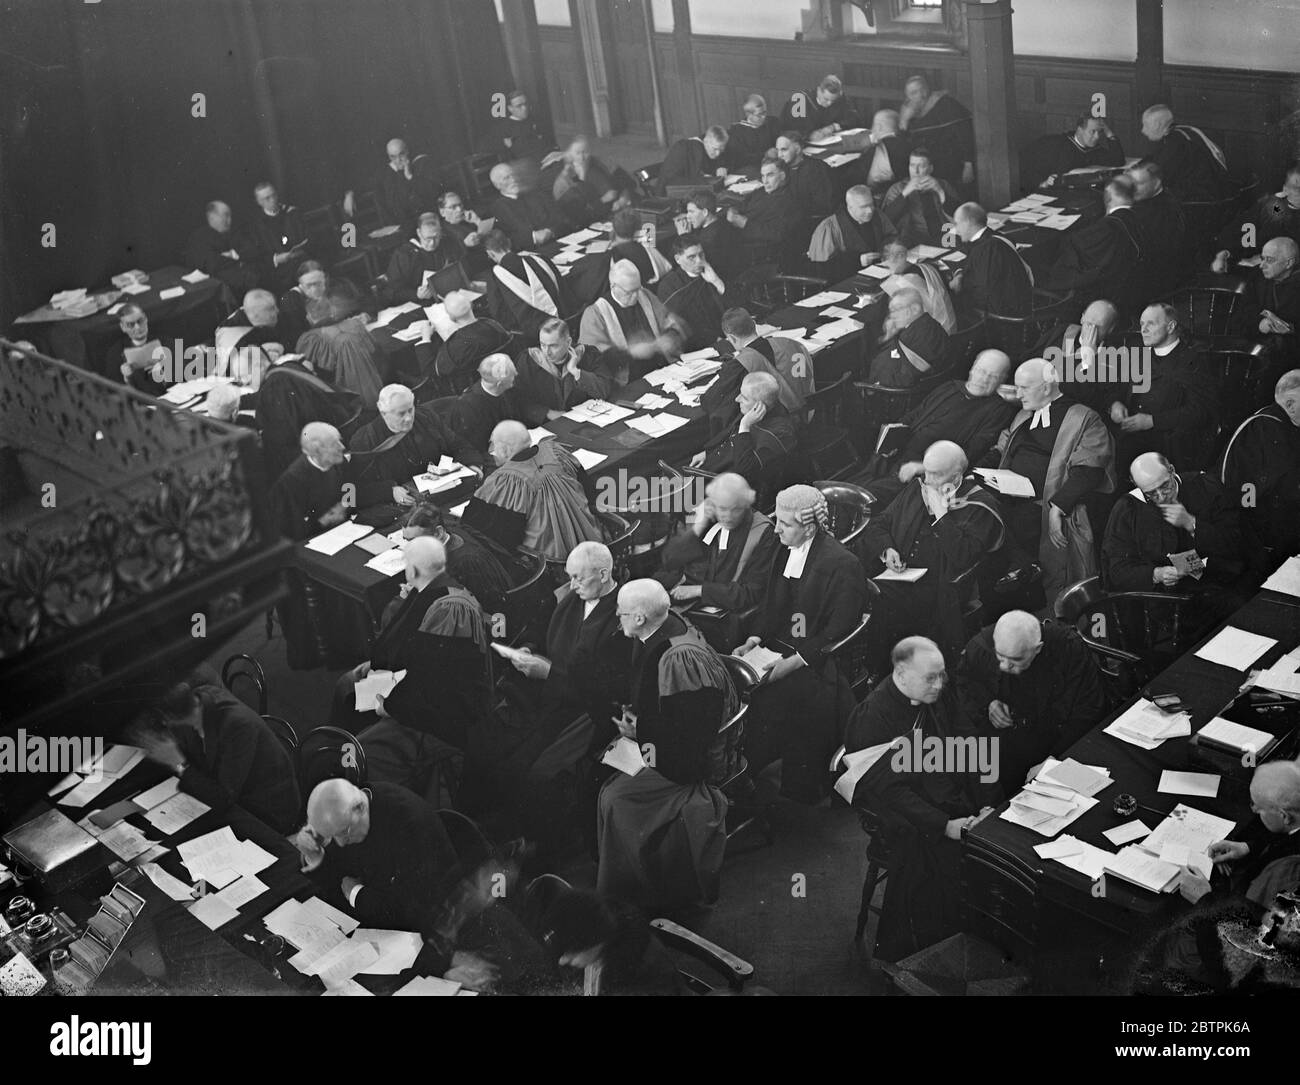 Convocation of Canterbury opens . The sitting of the Lower House of the Convocation in progress at Church House , Westminster . Dr Kidd is the Prolocutor . 23 January 1935 Stock Photo